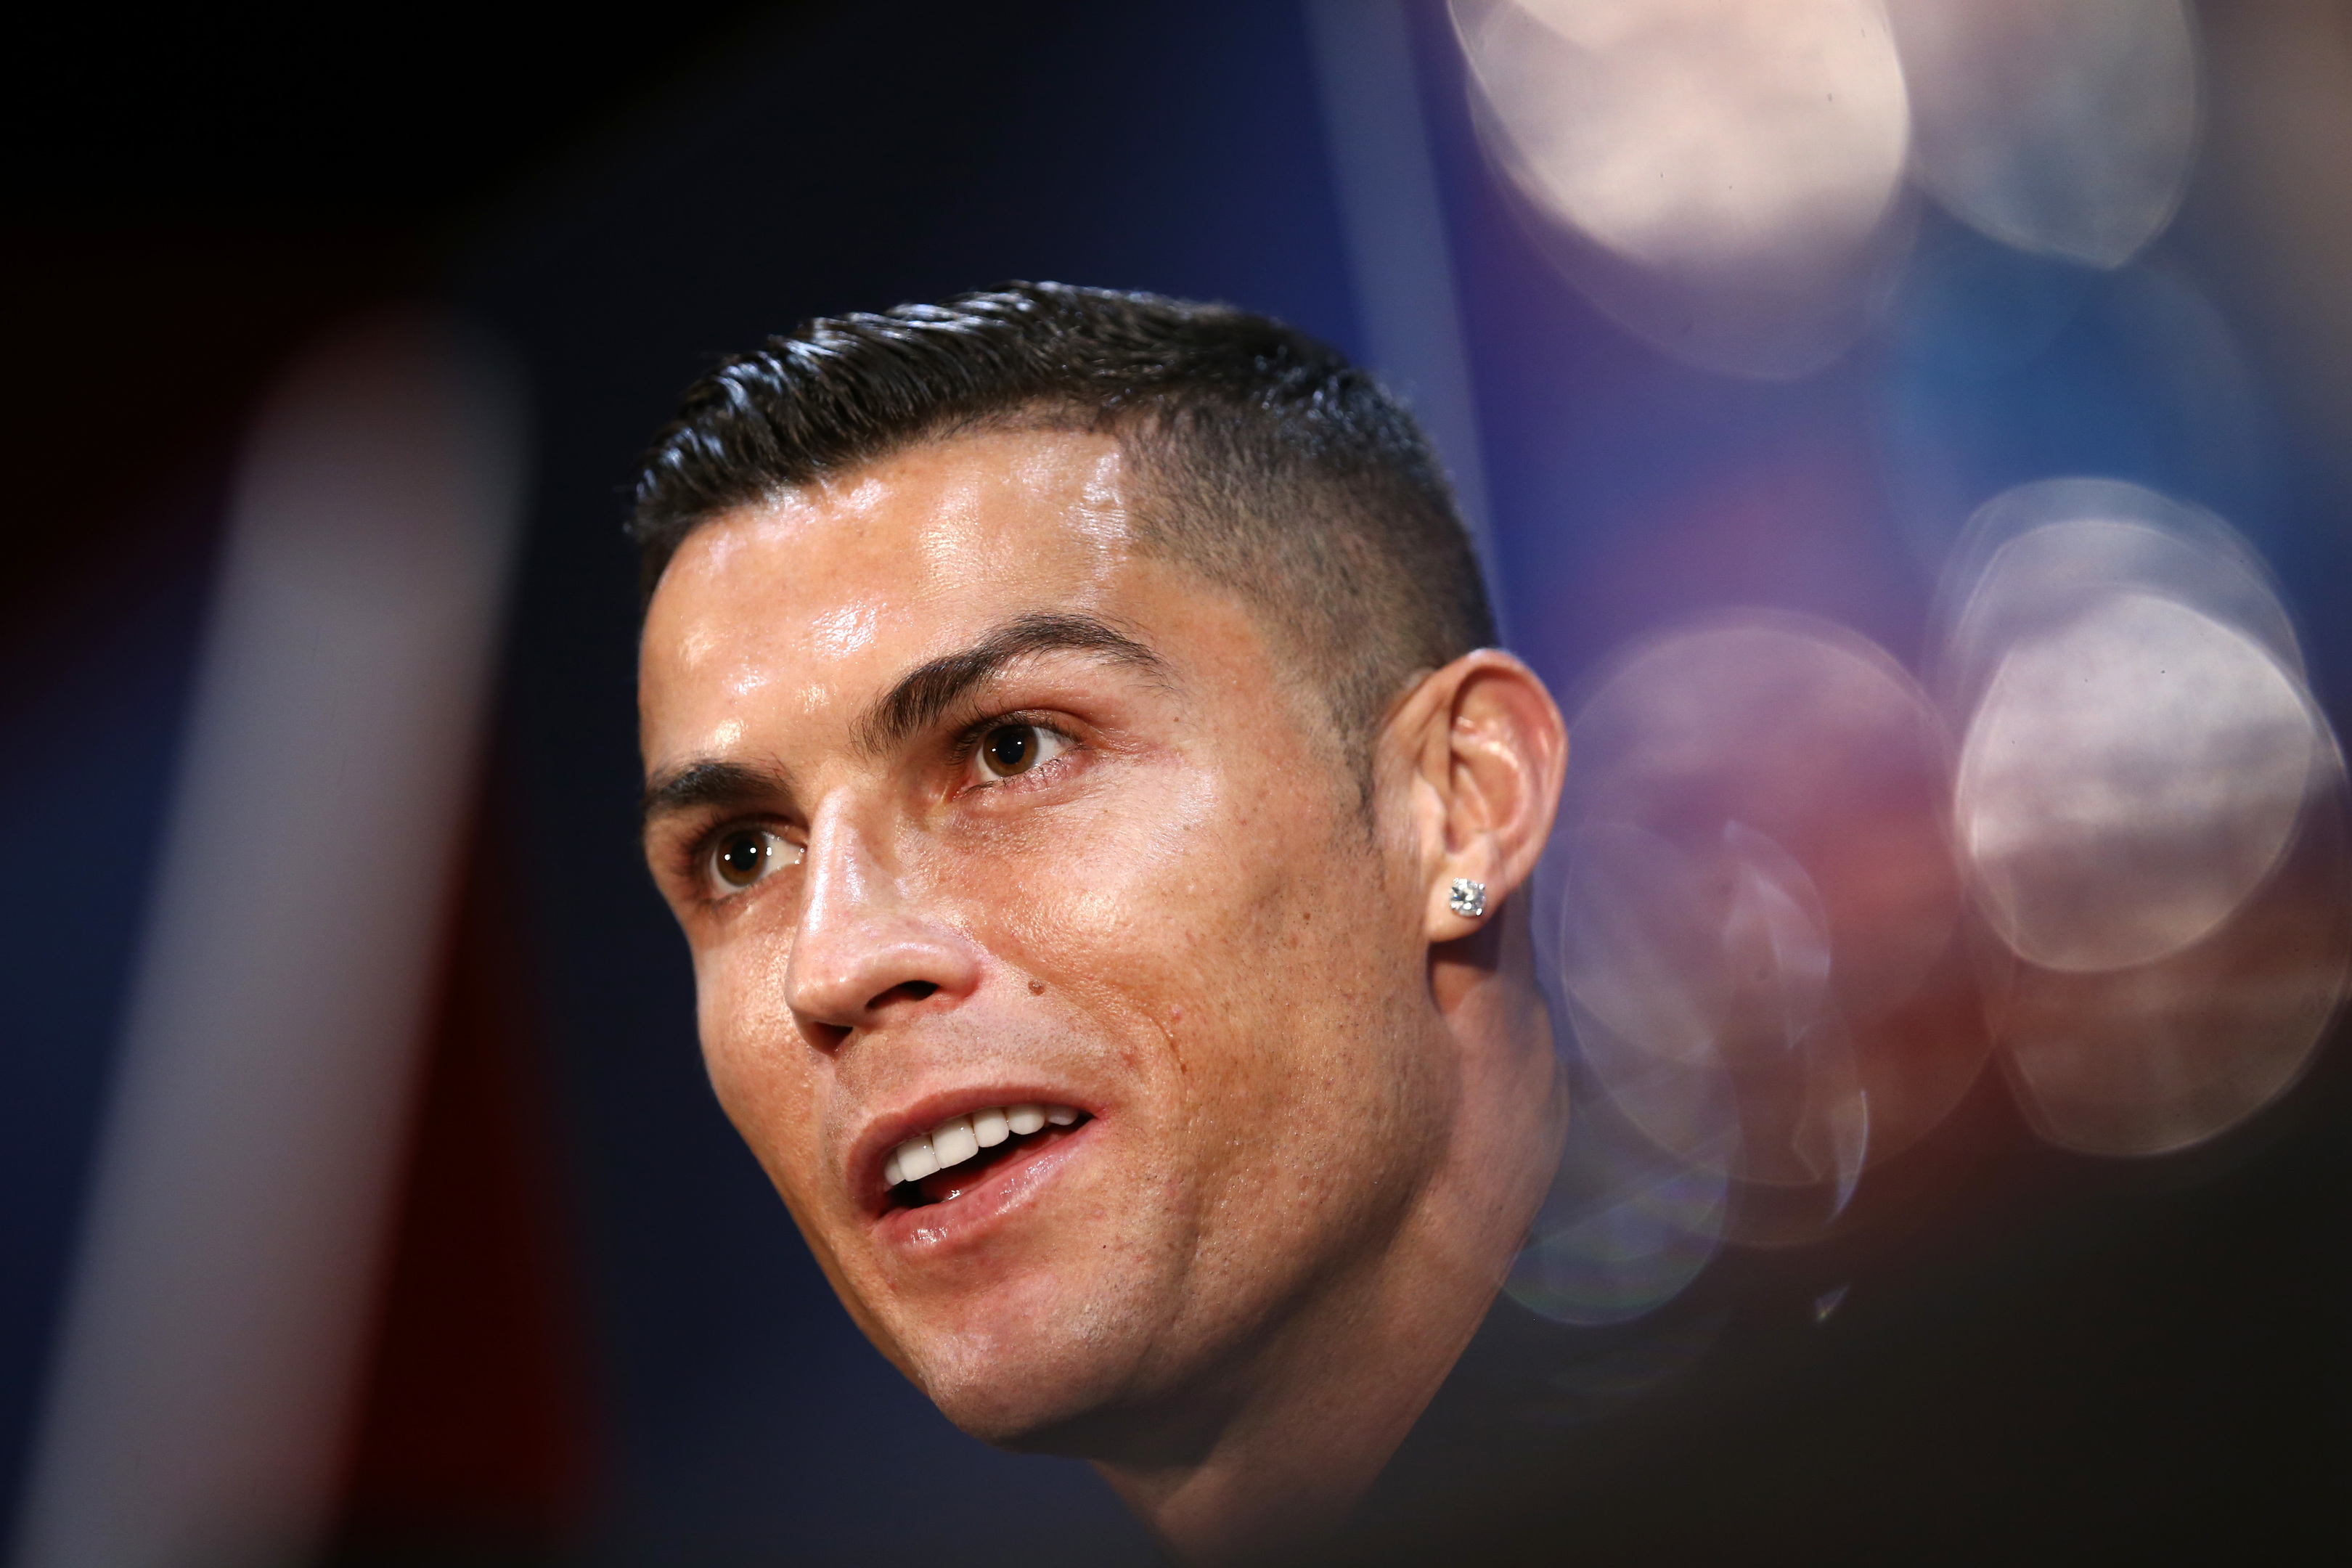 Cristiano Ronaldo (Jan Kruger/Getty Images)